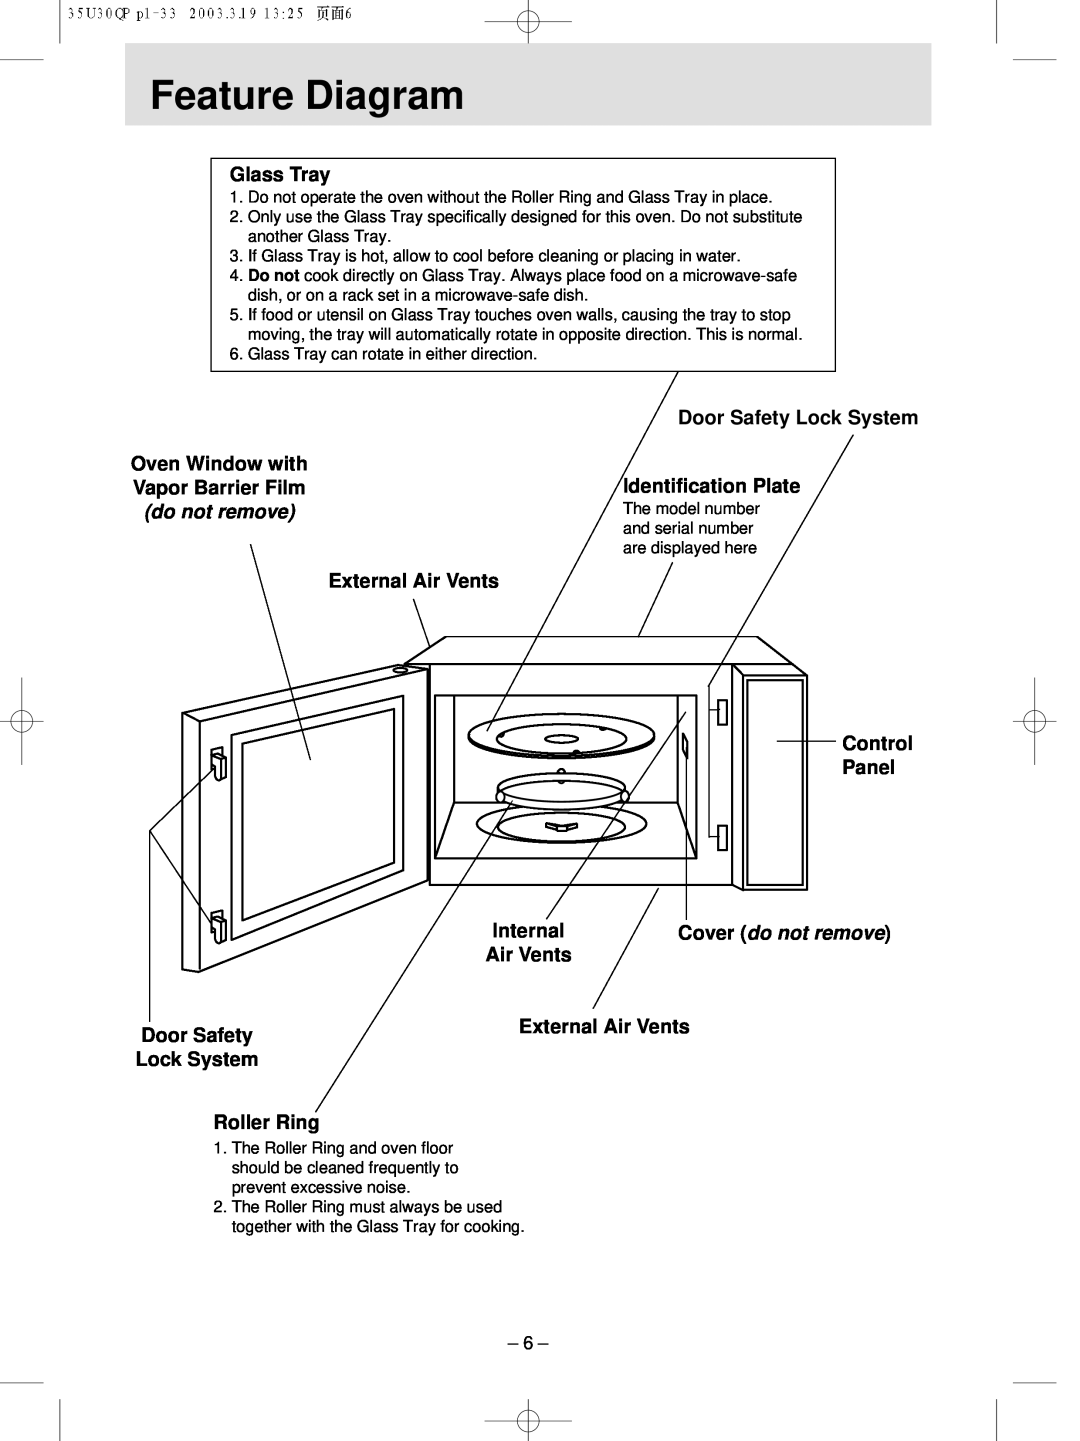 Panasonic NN-MX21 manual Feature Diagram, Glass Tray, Door Safety Lock System Identification Plate, External Air Vents 